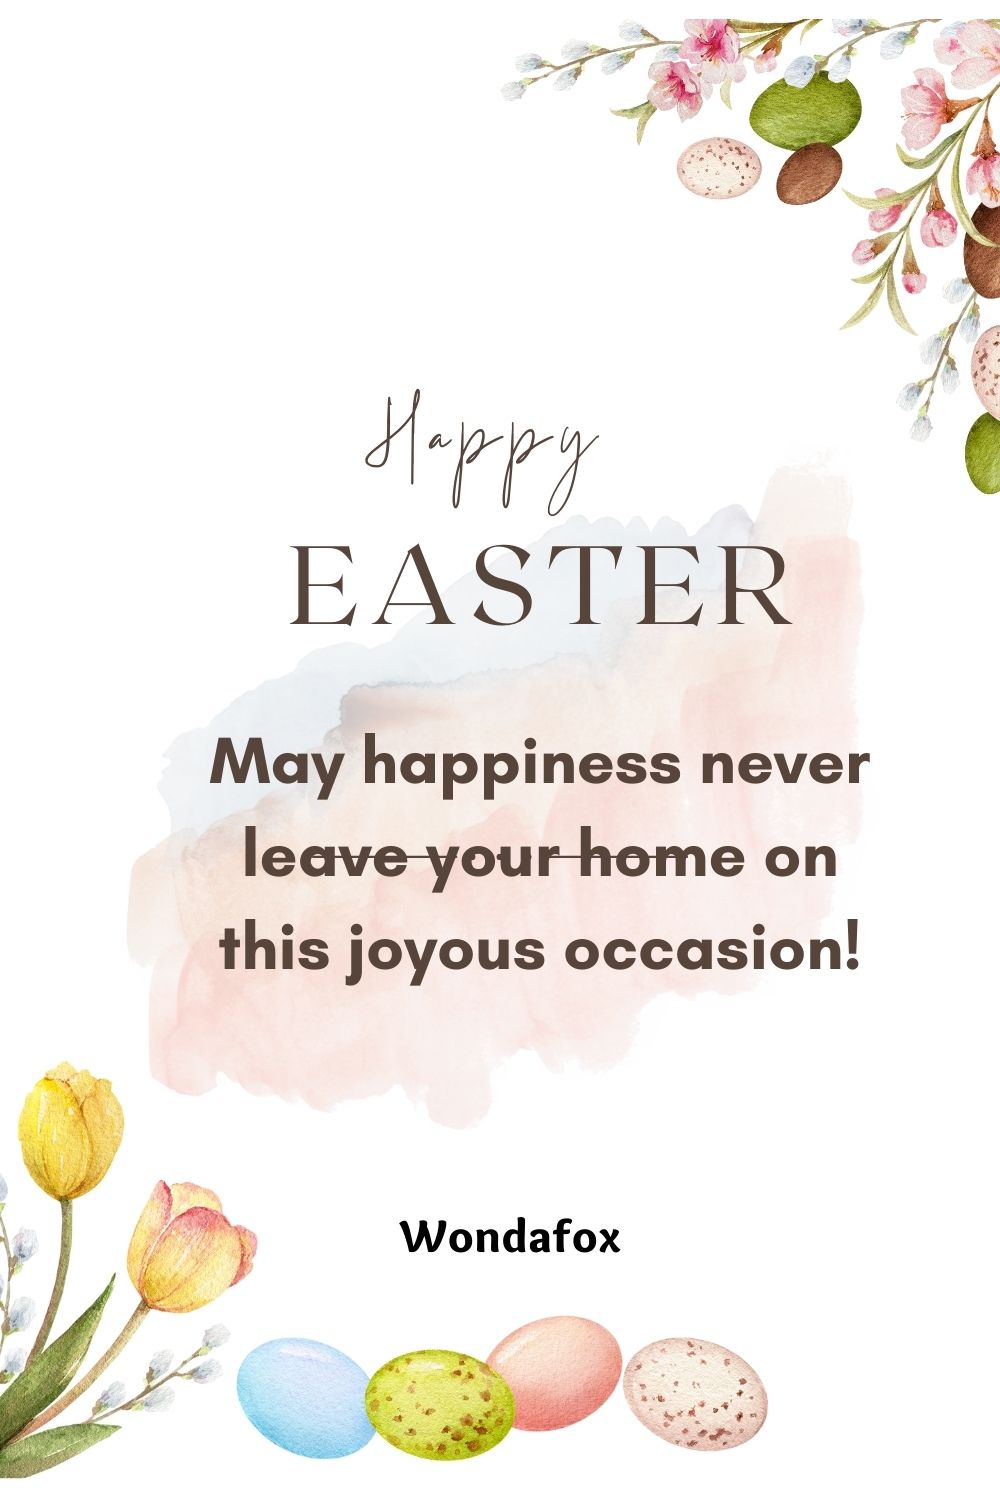 Happy Easter. May happiness never leave your home on this joyous occasion!